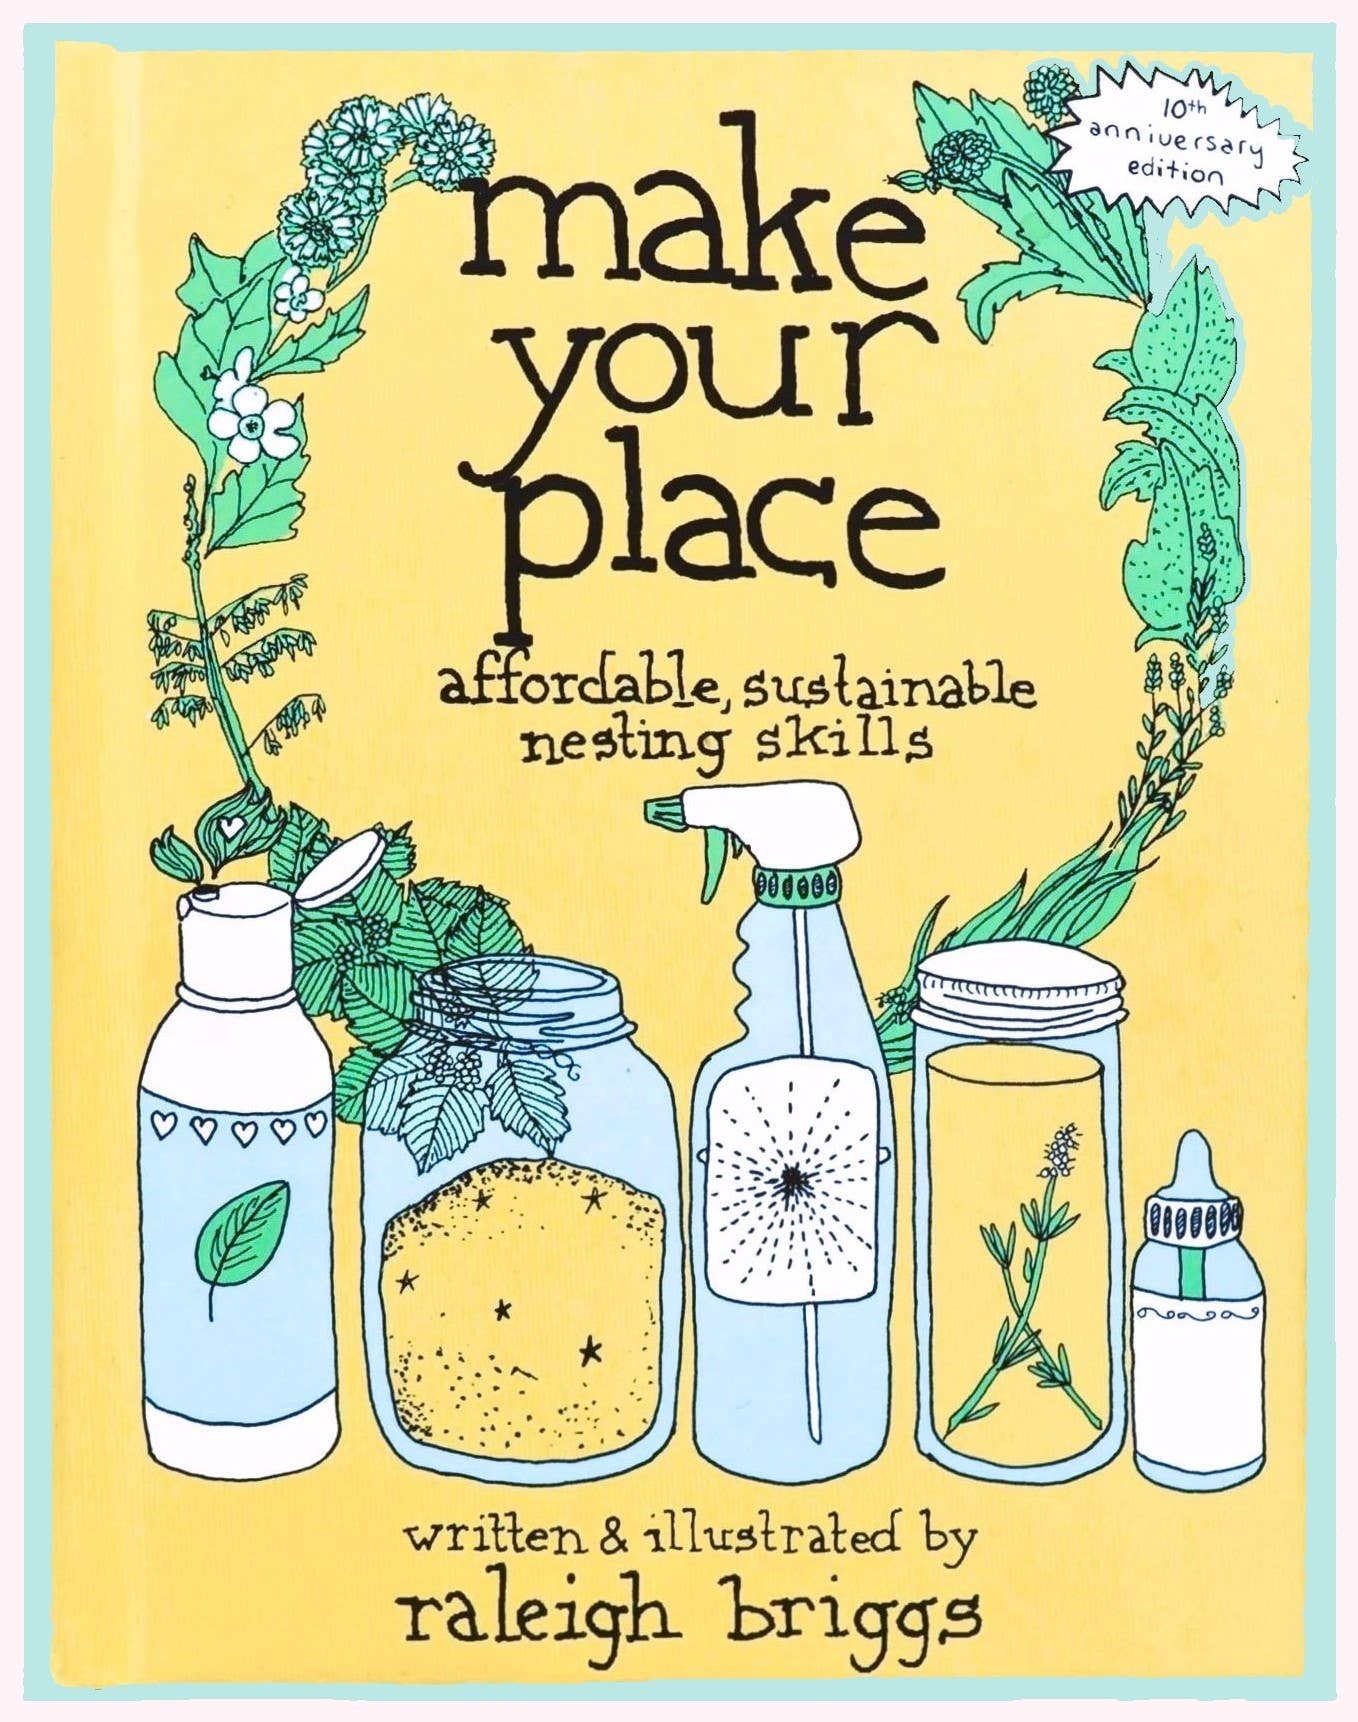 Make Your Place: Affordable, Sustainable Nesting Skills yoga smokes yoga studio, delivery, delivery near me, yoga smokes smoke shop, find smoke shop, head shop near me, yoga studio, headshop, head shop, local smoke shop, psl, psl smoke shop, smoke shop, smokeshop, yoga, yoga studio, dispensary, local dispensary, smokeshop near me, port saint lucie, florida, port st lucie, lounge, life, highlife, love, stoned, highsociety. Yoga Smokes Affordable, Sustainable Nesting Skills